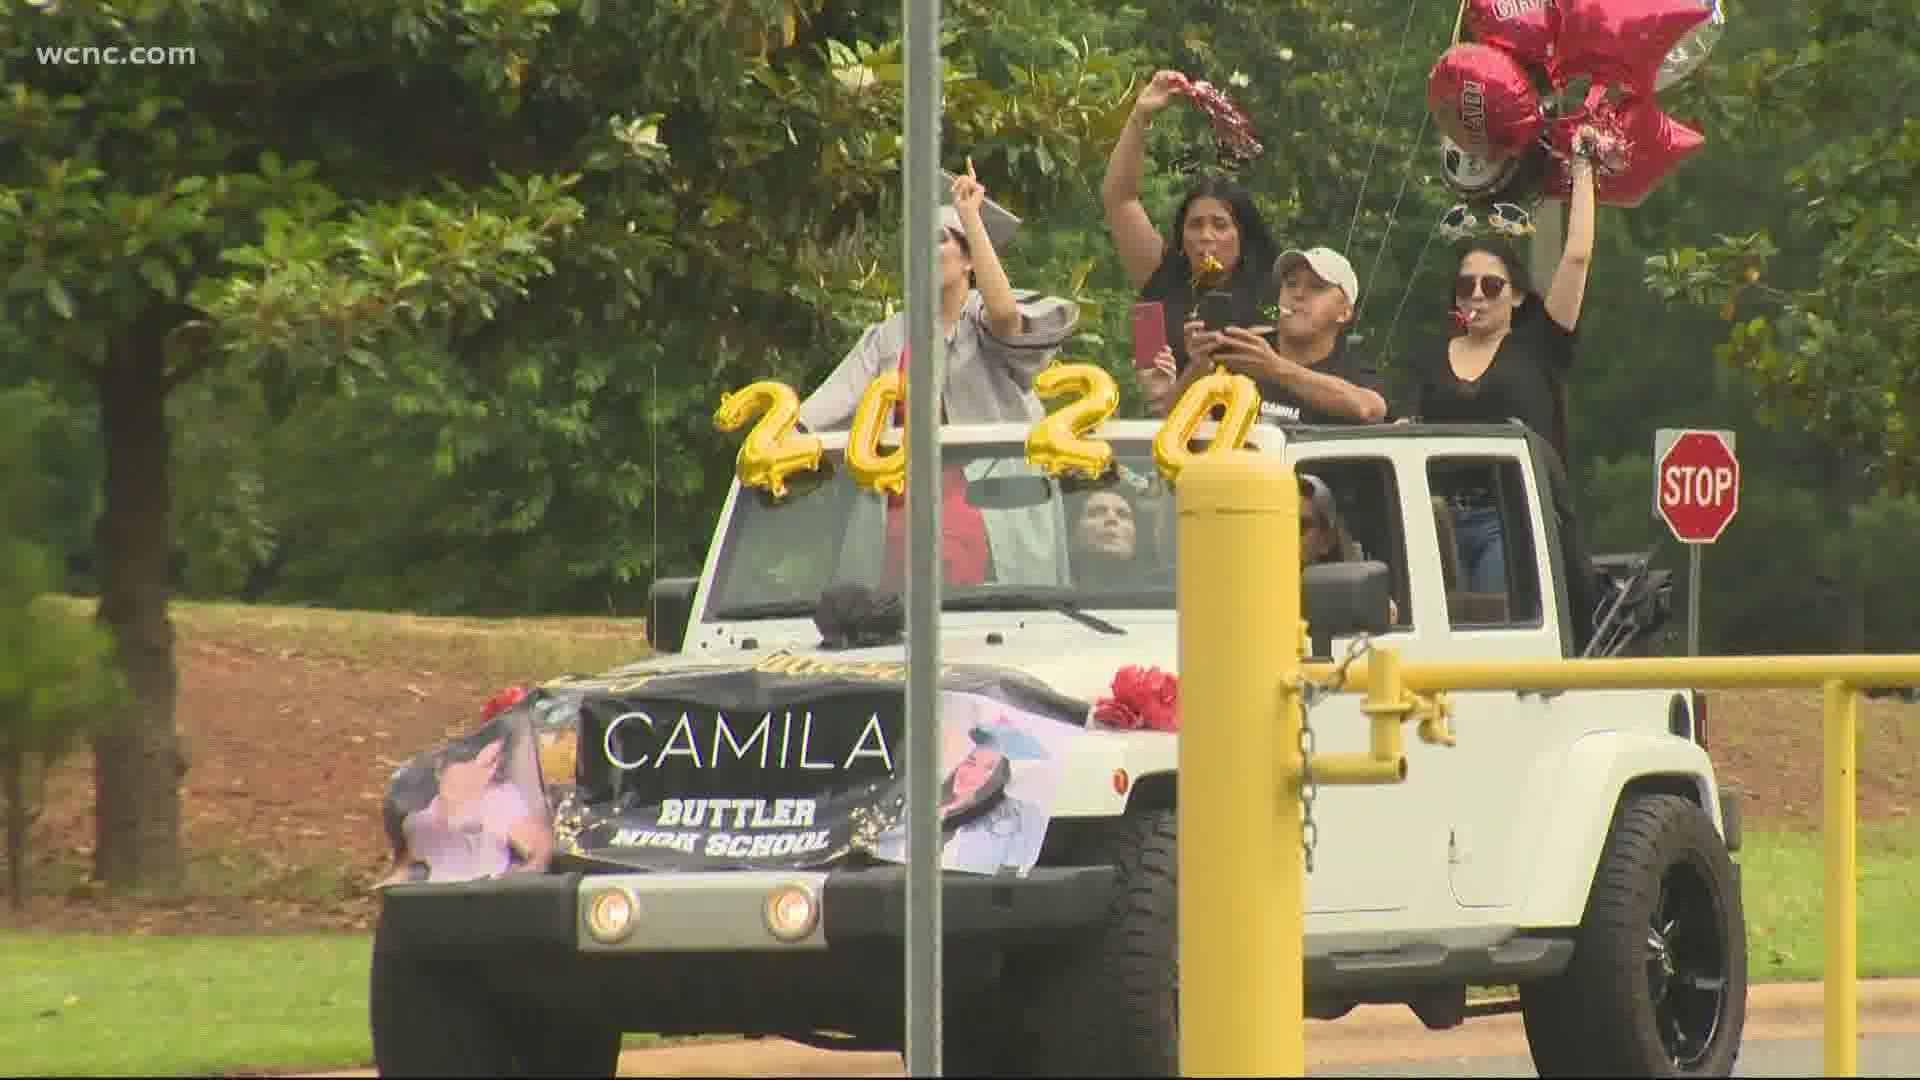 Cars full of family members were able to drive up as the school principal handed out diplomas.